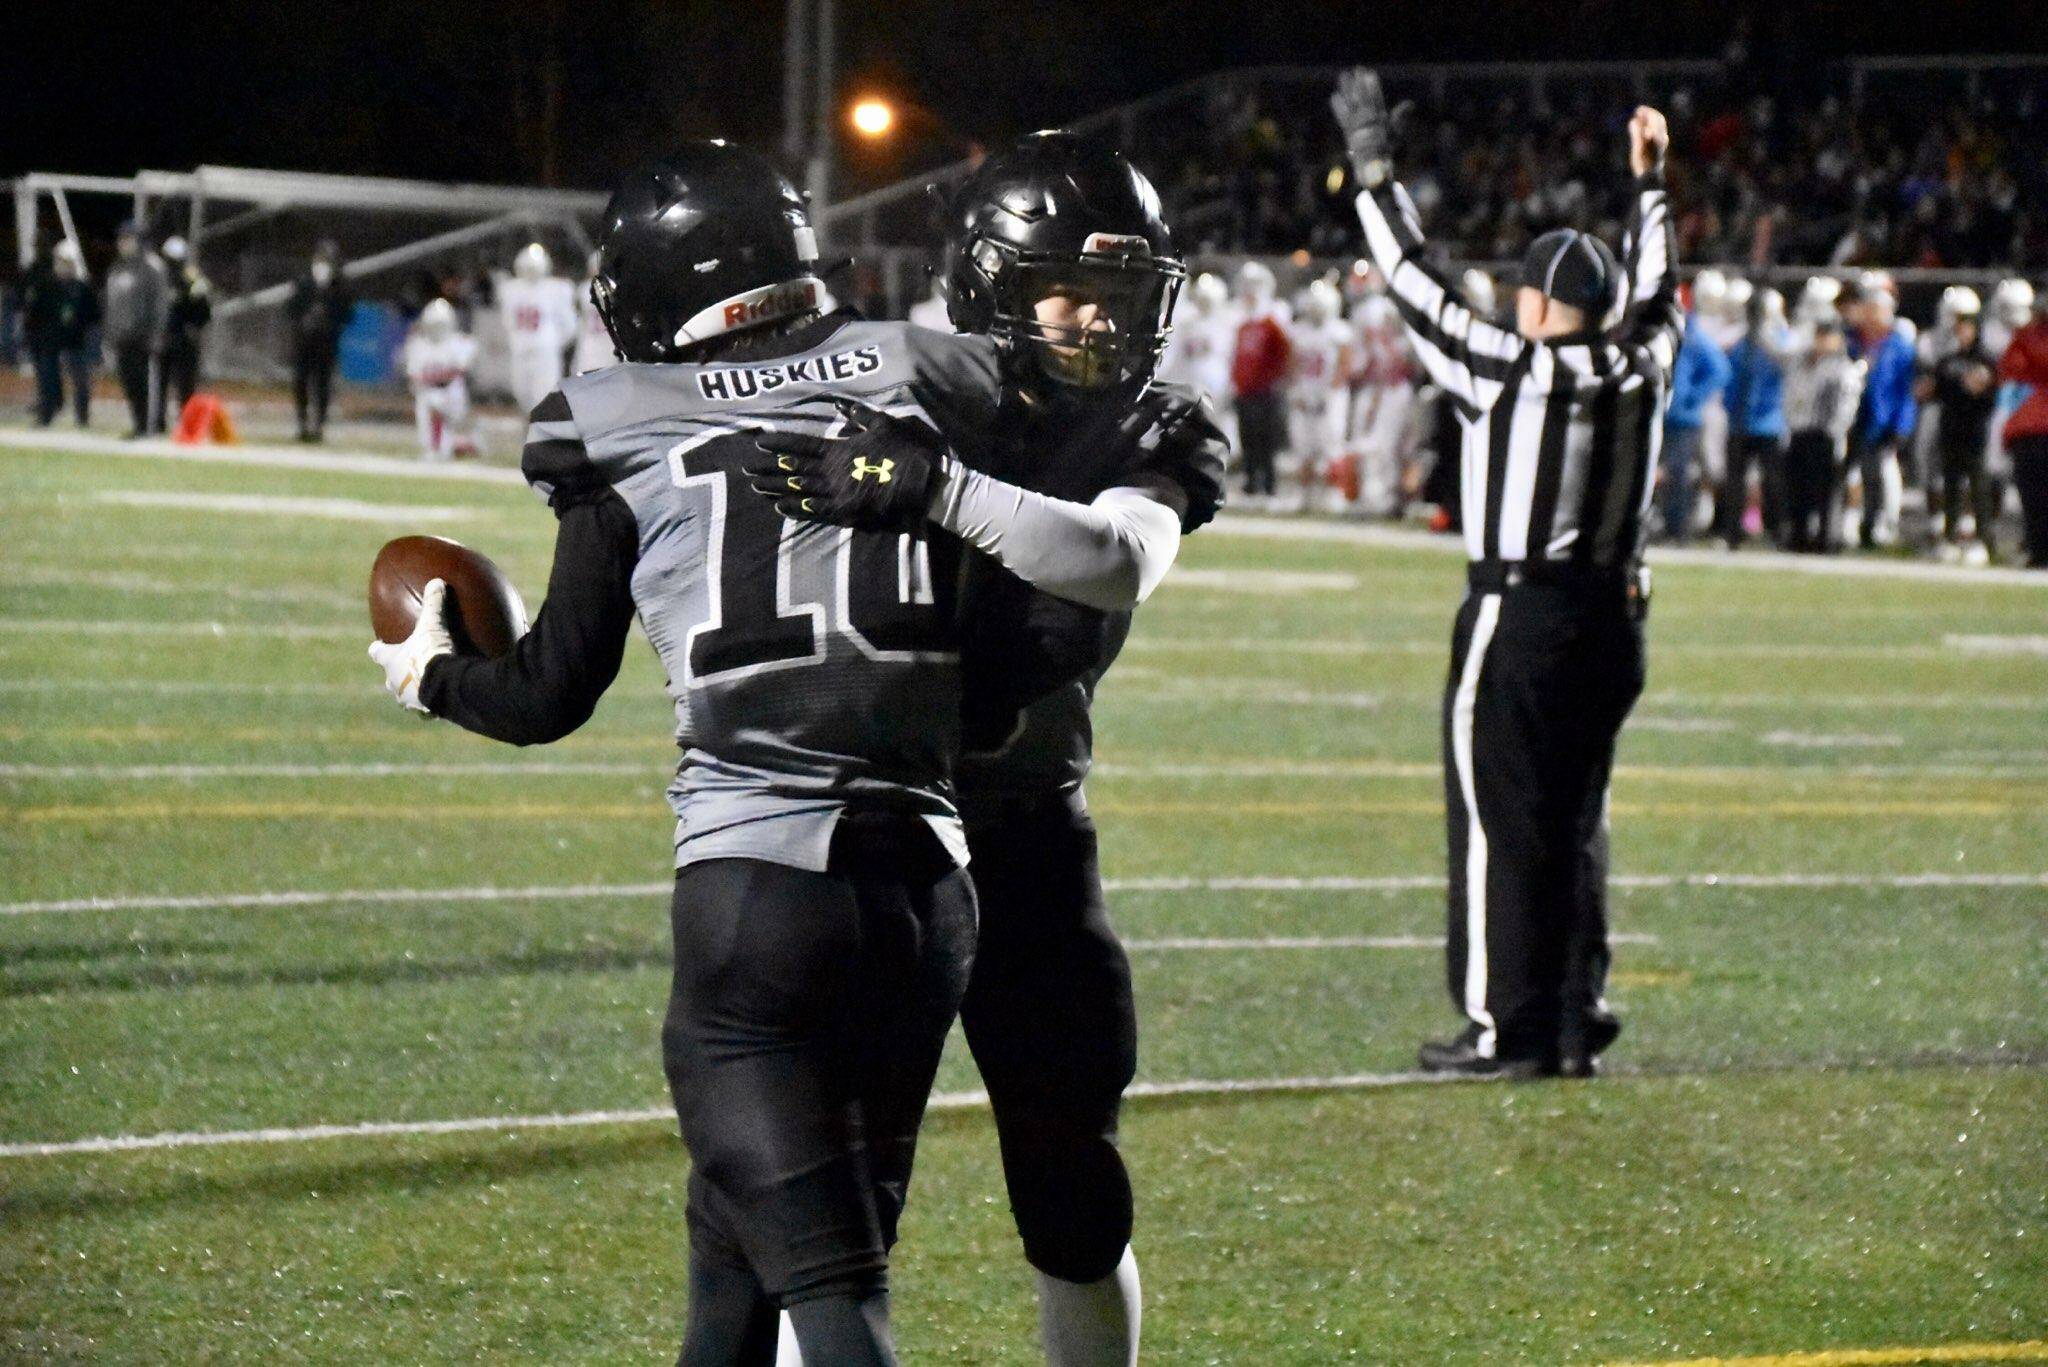 James Connally (10), a senior, and Payton Grant, a junior, embrace following a touchdown. Connally caught and threw for a touchdown in the Huskies’ 30-17 loss to Bettye Davis East Anchorage High School. (Courtesy Photo / Larry Schrader)